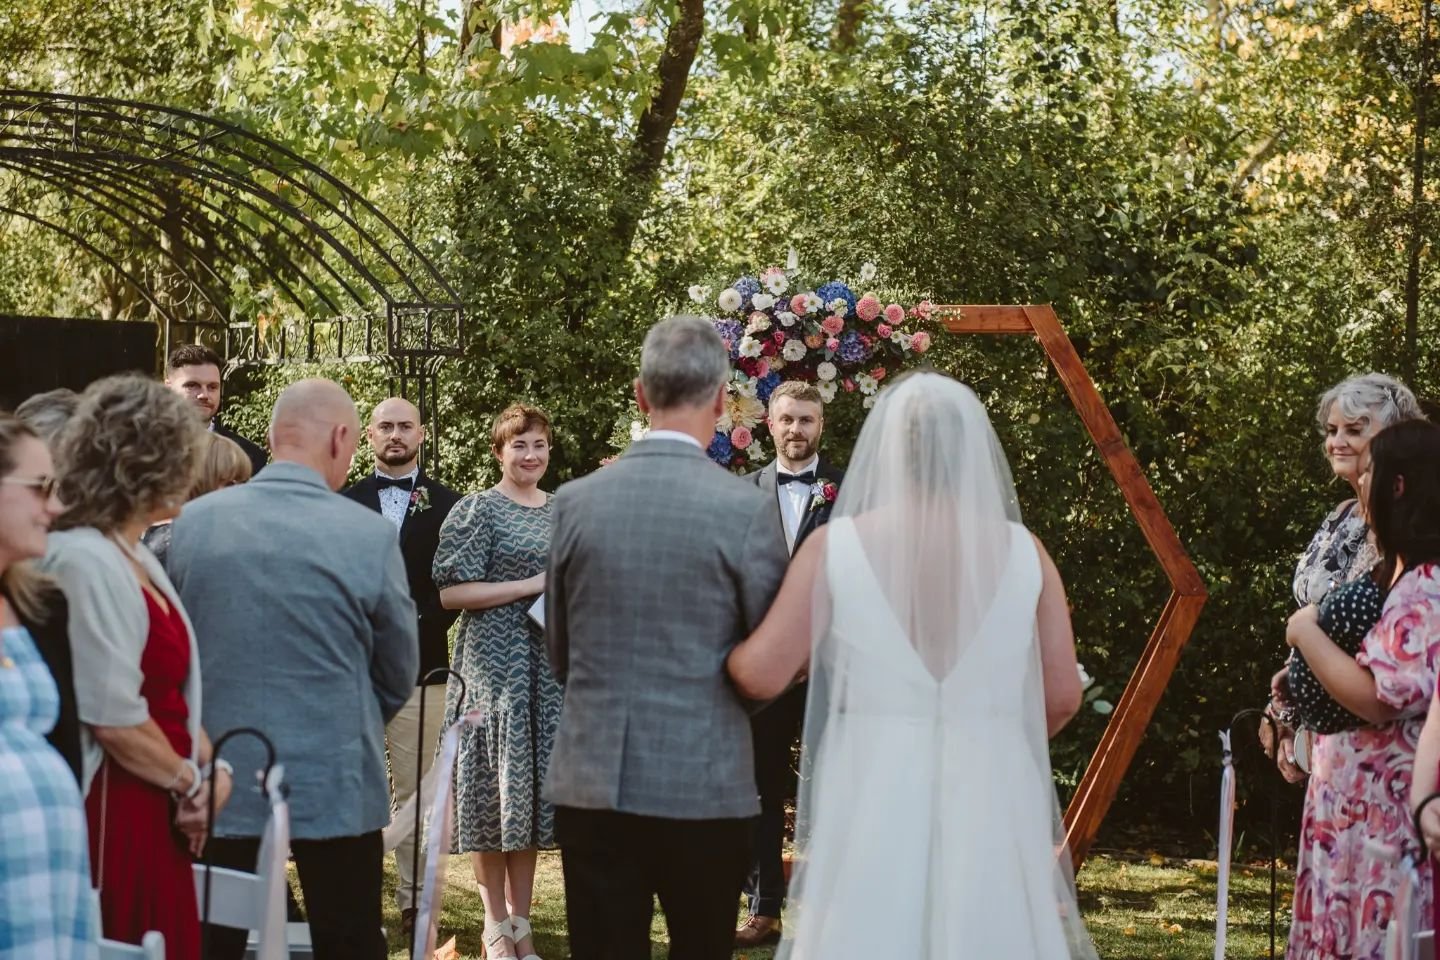 'We were struggling to find a celebrant that we felt matched our vision for our wedding day, until we met Vic. From the minute we got talking to her we knew we had found someone who was going to help us every step of the way to create the perfect rel